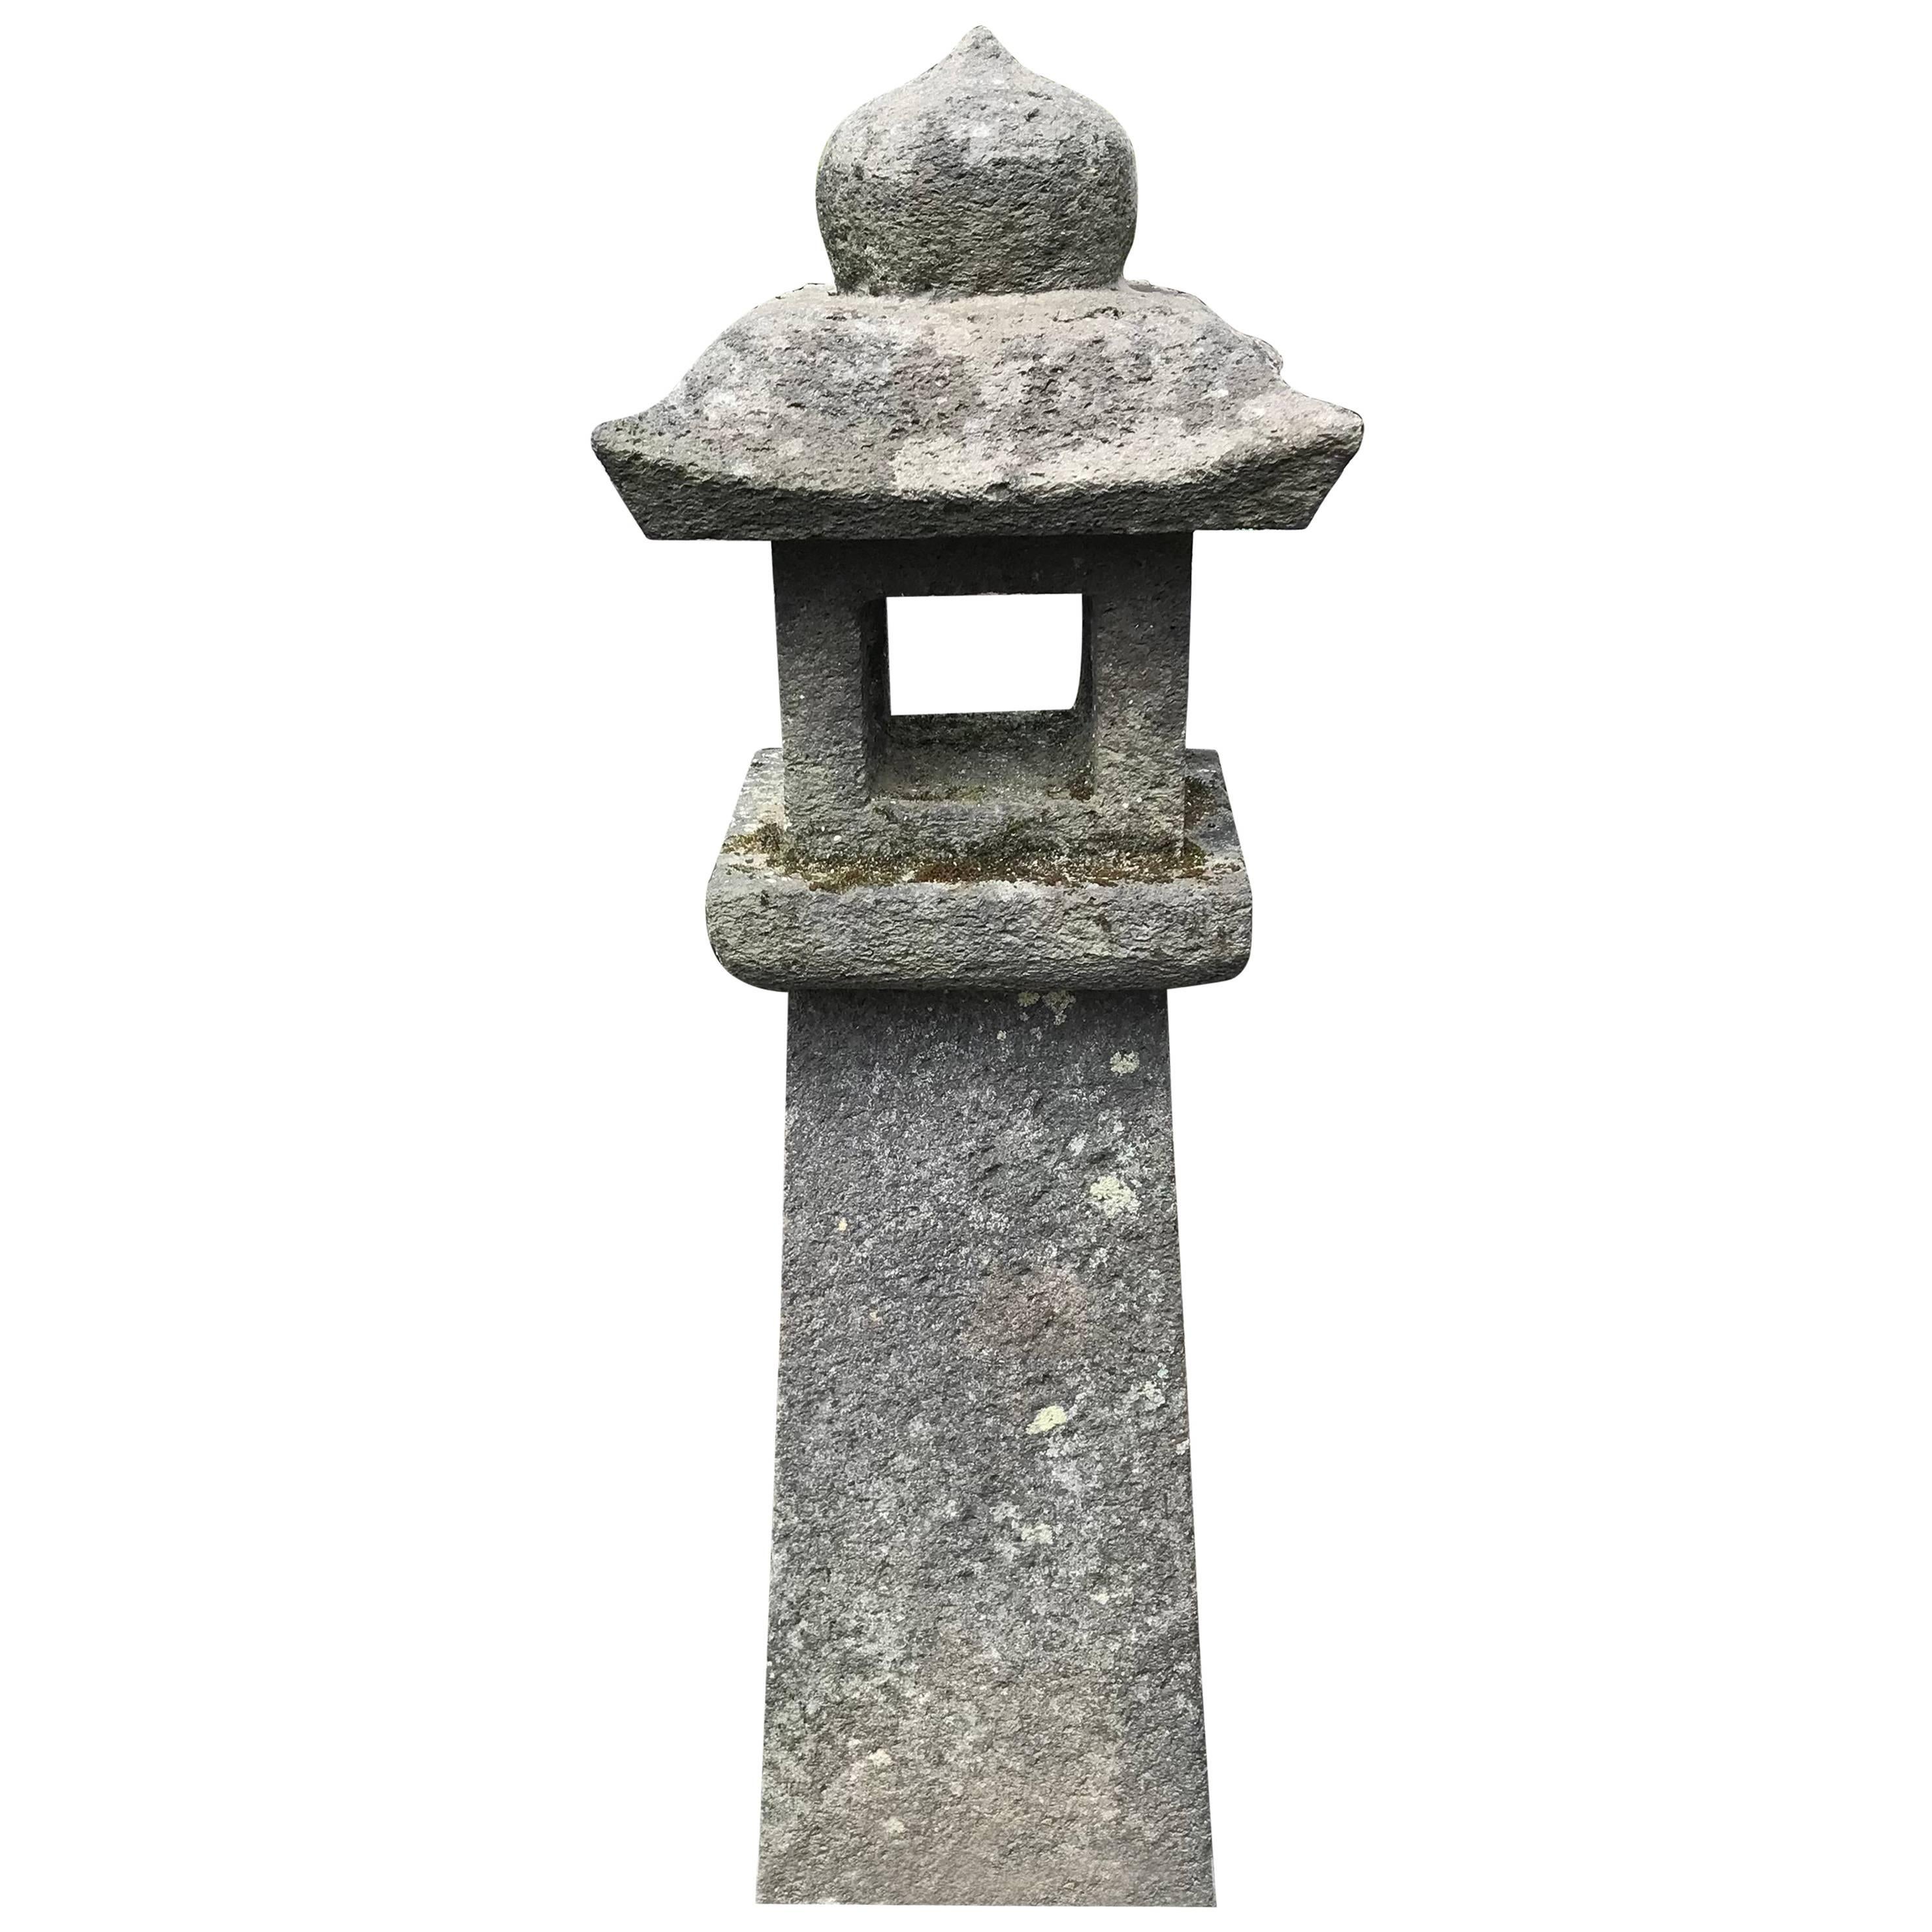 From our most recent Japanese acquisitions travels

Seldom available- a rare petite antique beauty. 

Japan, a fine pathway stone lantern with original and beautiful lichen and patina from great age

They work especially well at night with an oil